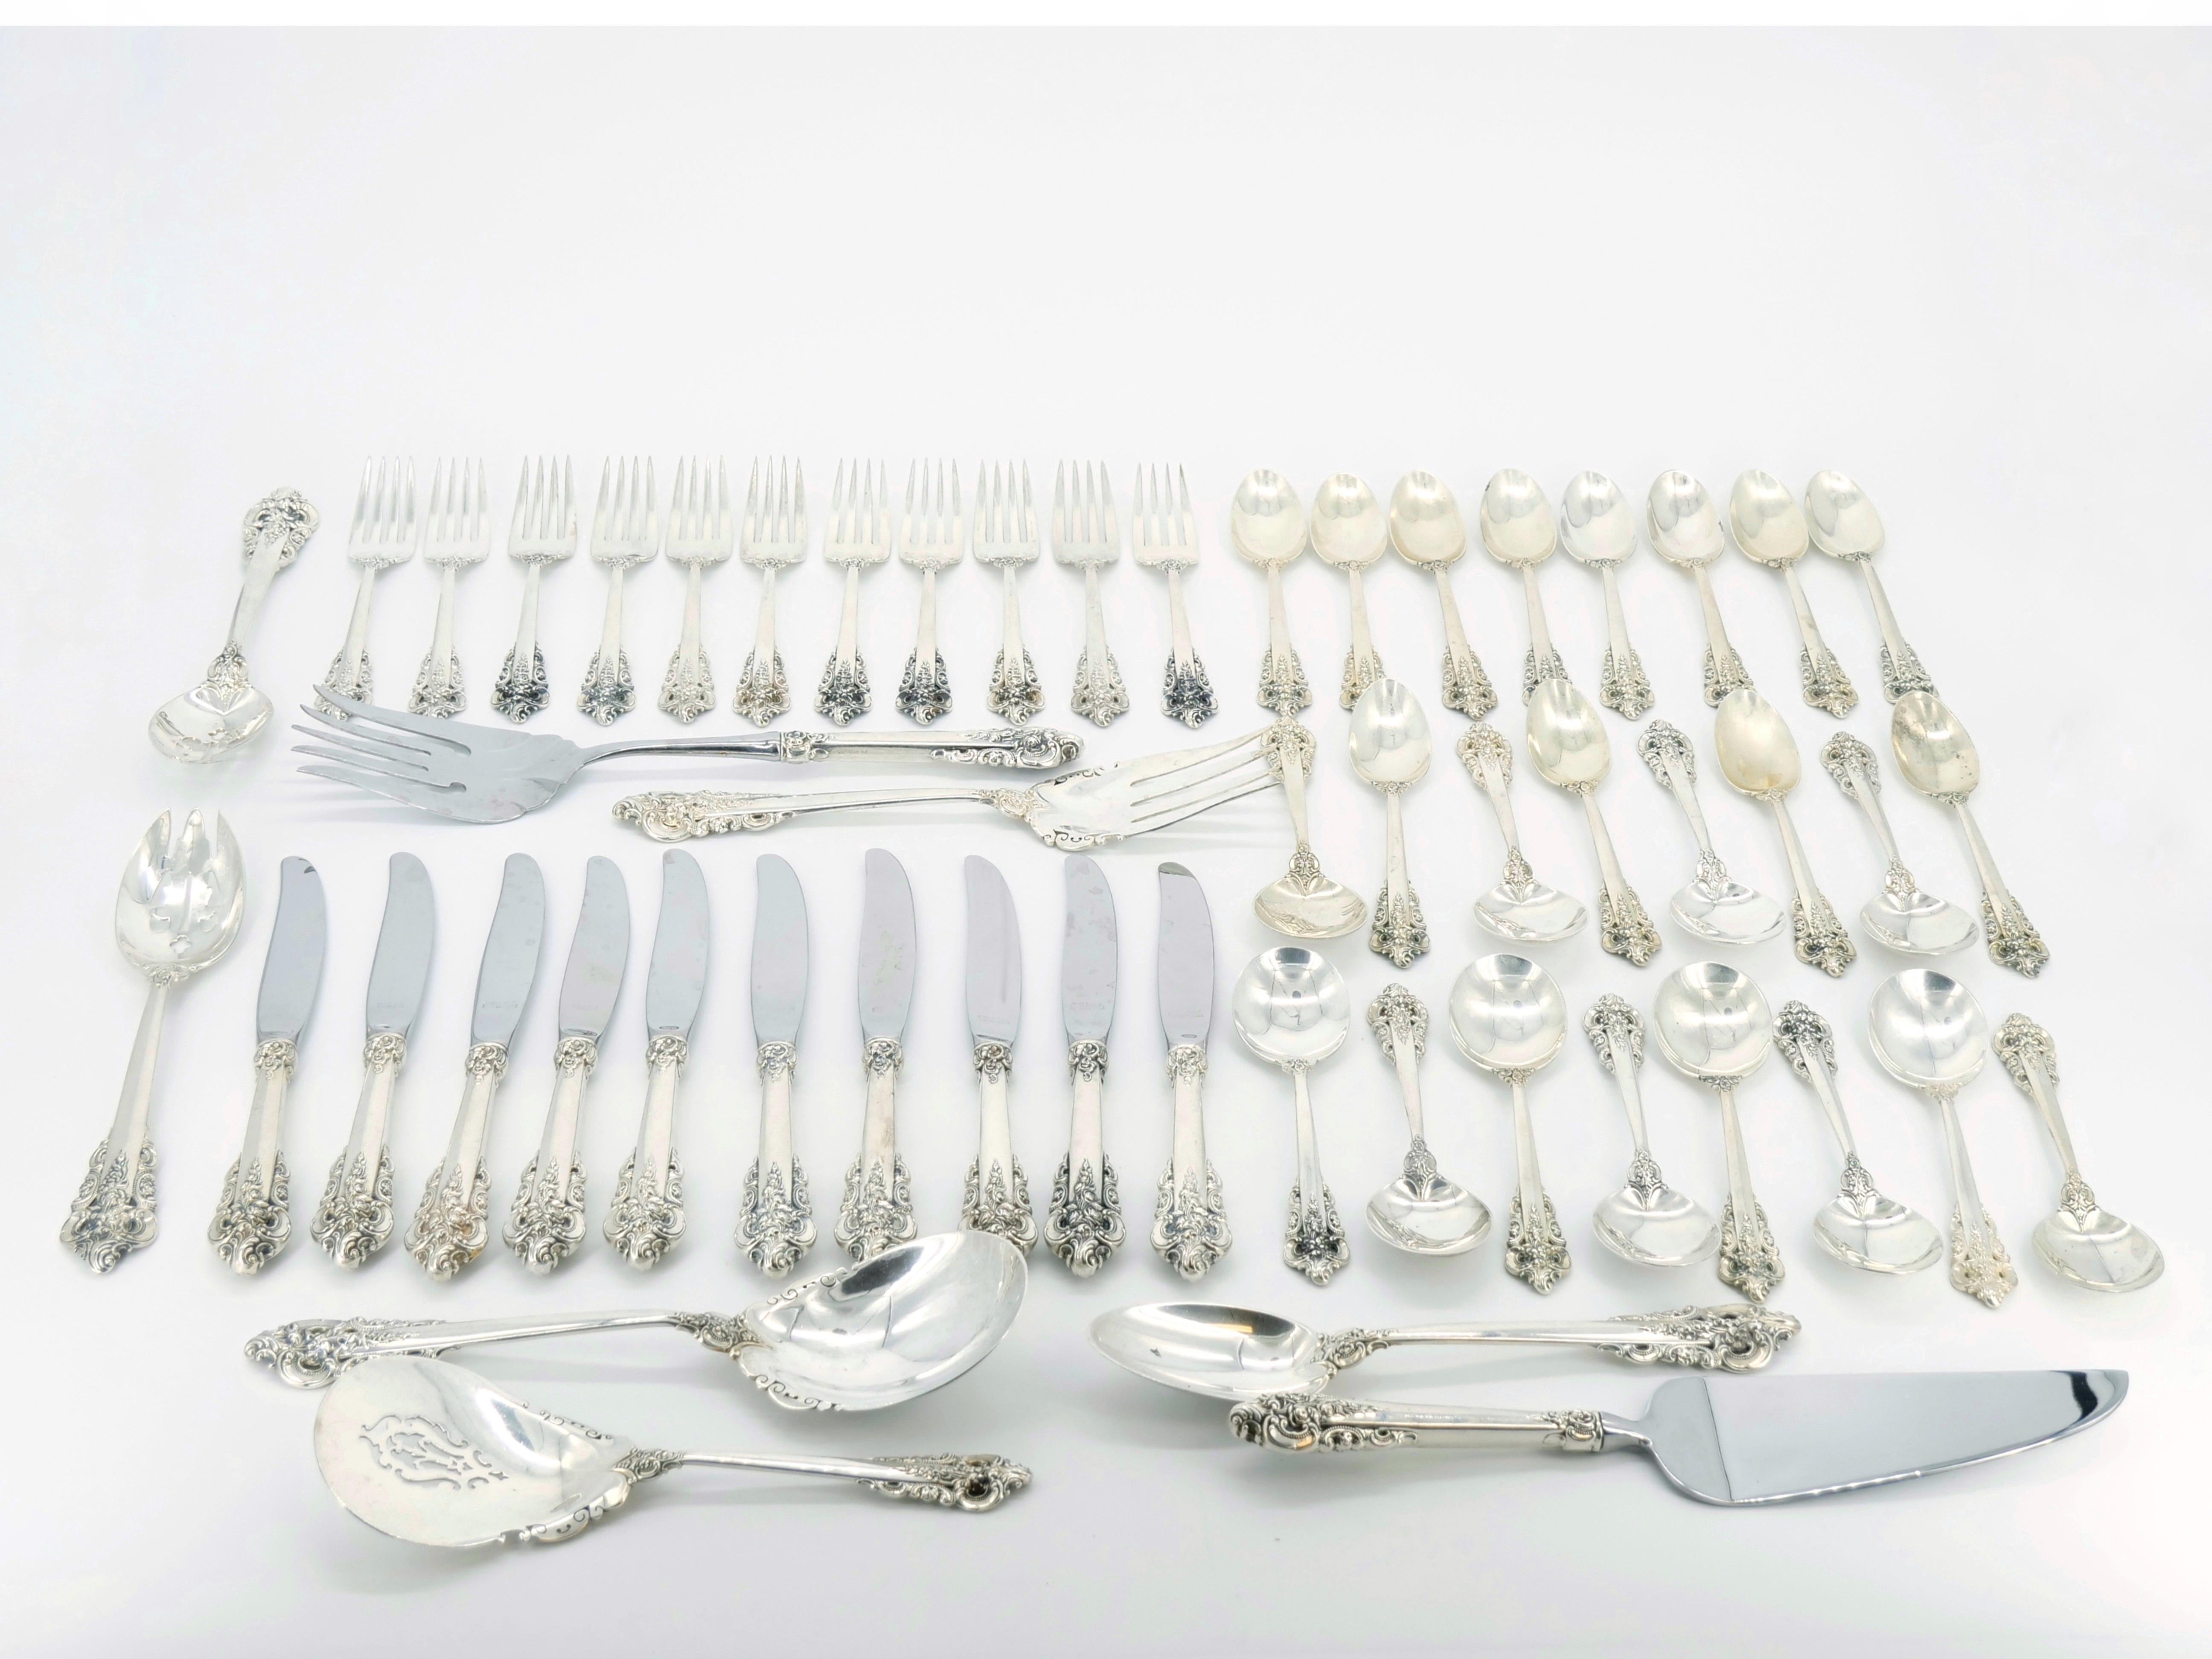 Elevate your dining experience with this exceptional North American Sterling Silver Flatware Service from the early 20th century, featuring the timeless elegance of the renowned Wallace Grand Baroque pattern. Meticulously maintained and in great